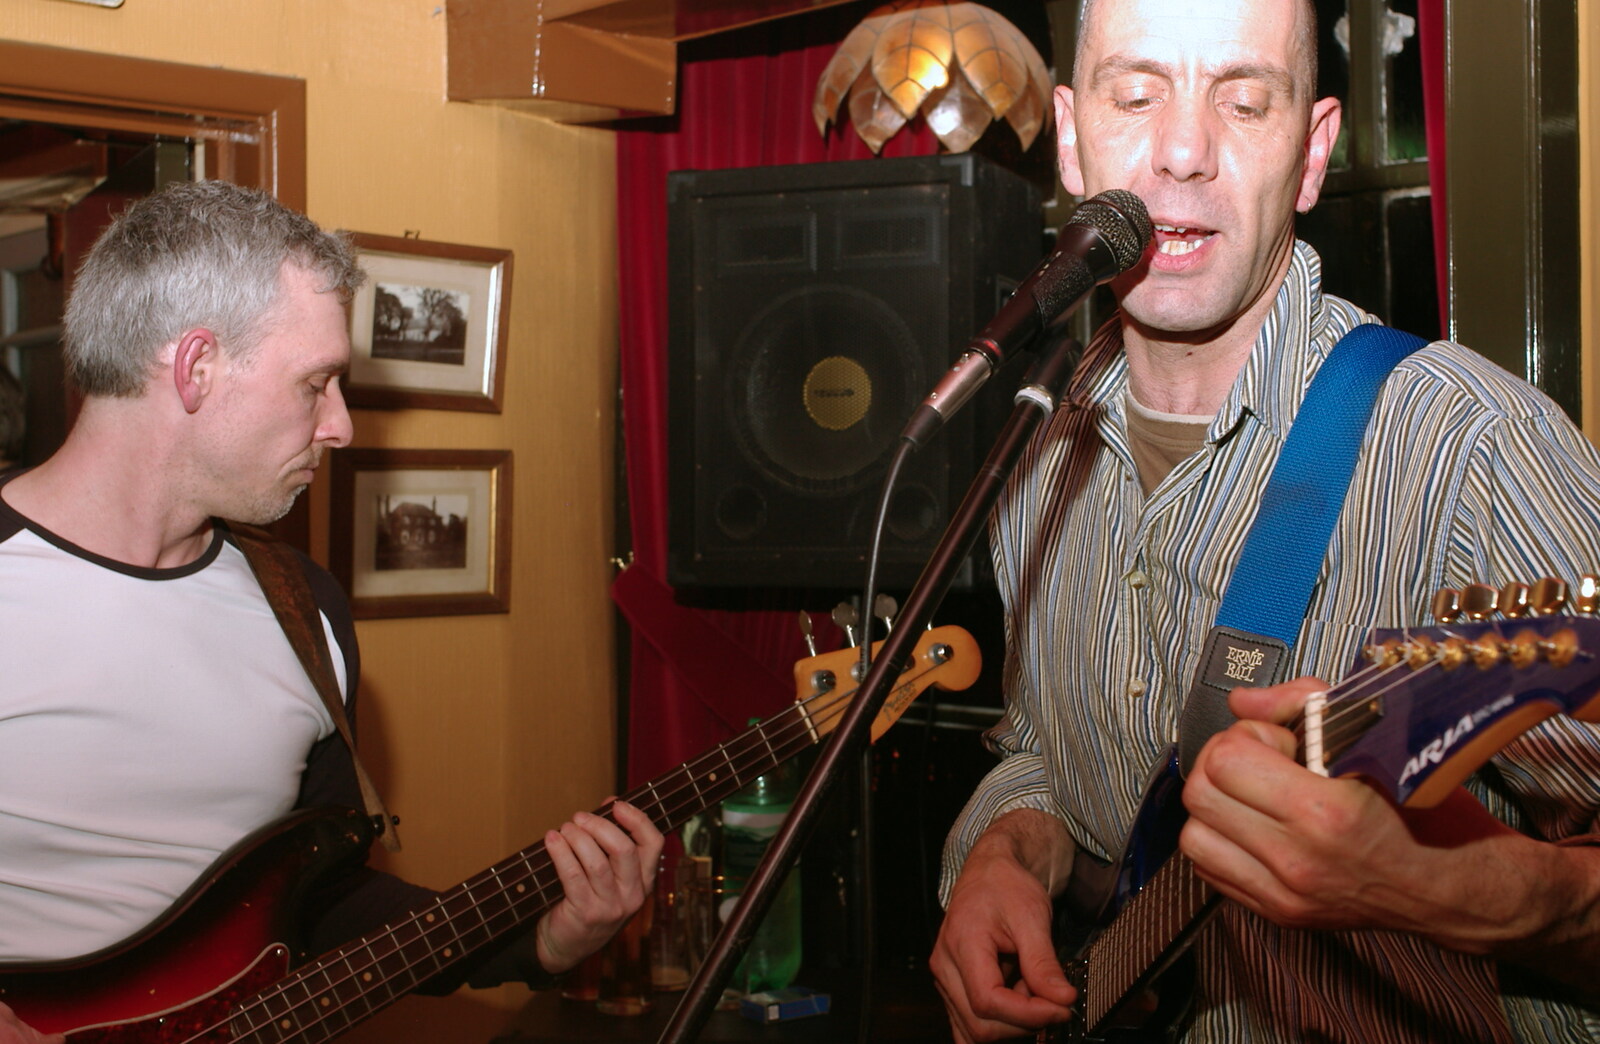 Another band does its thing from Tsunami-Aid at the Greyhound, Botesdale, Suffolk - 5th February 2005